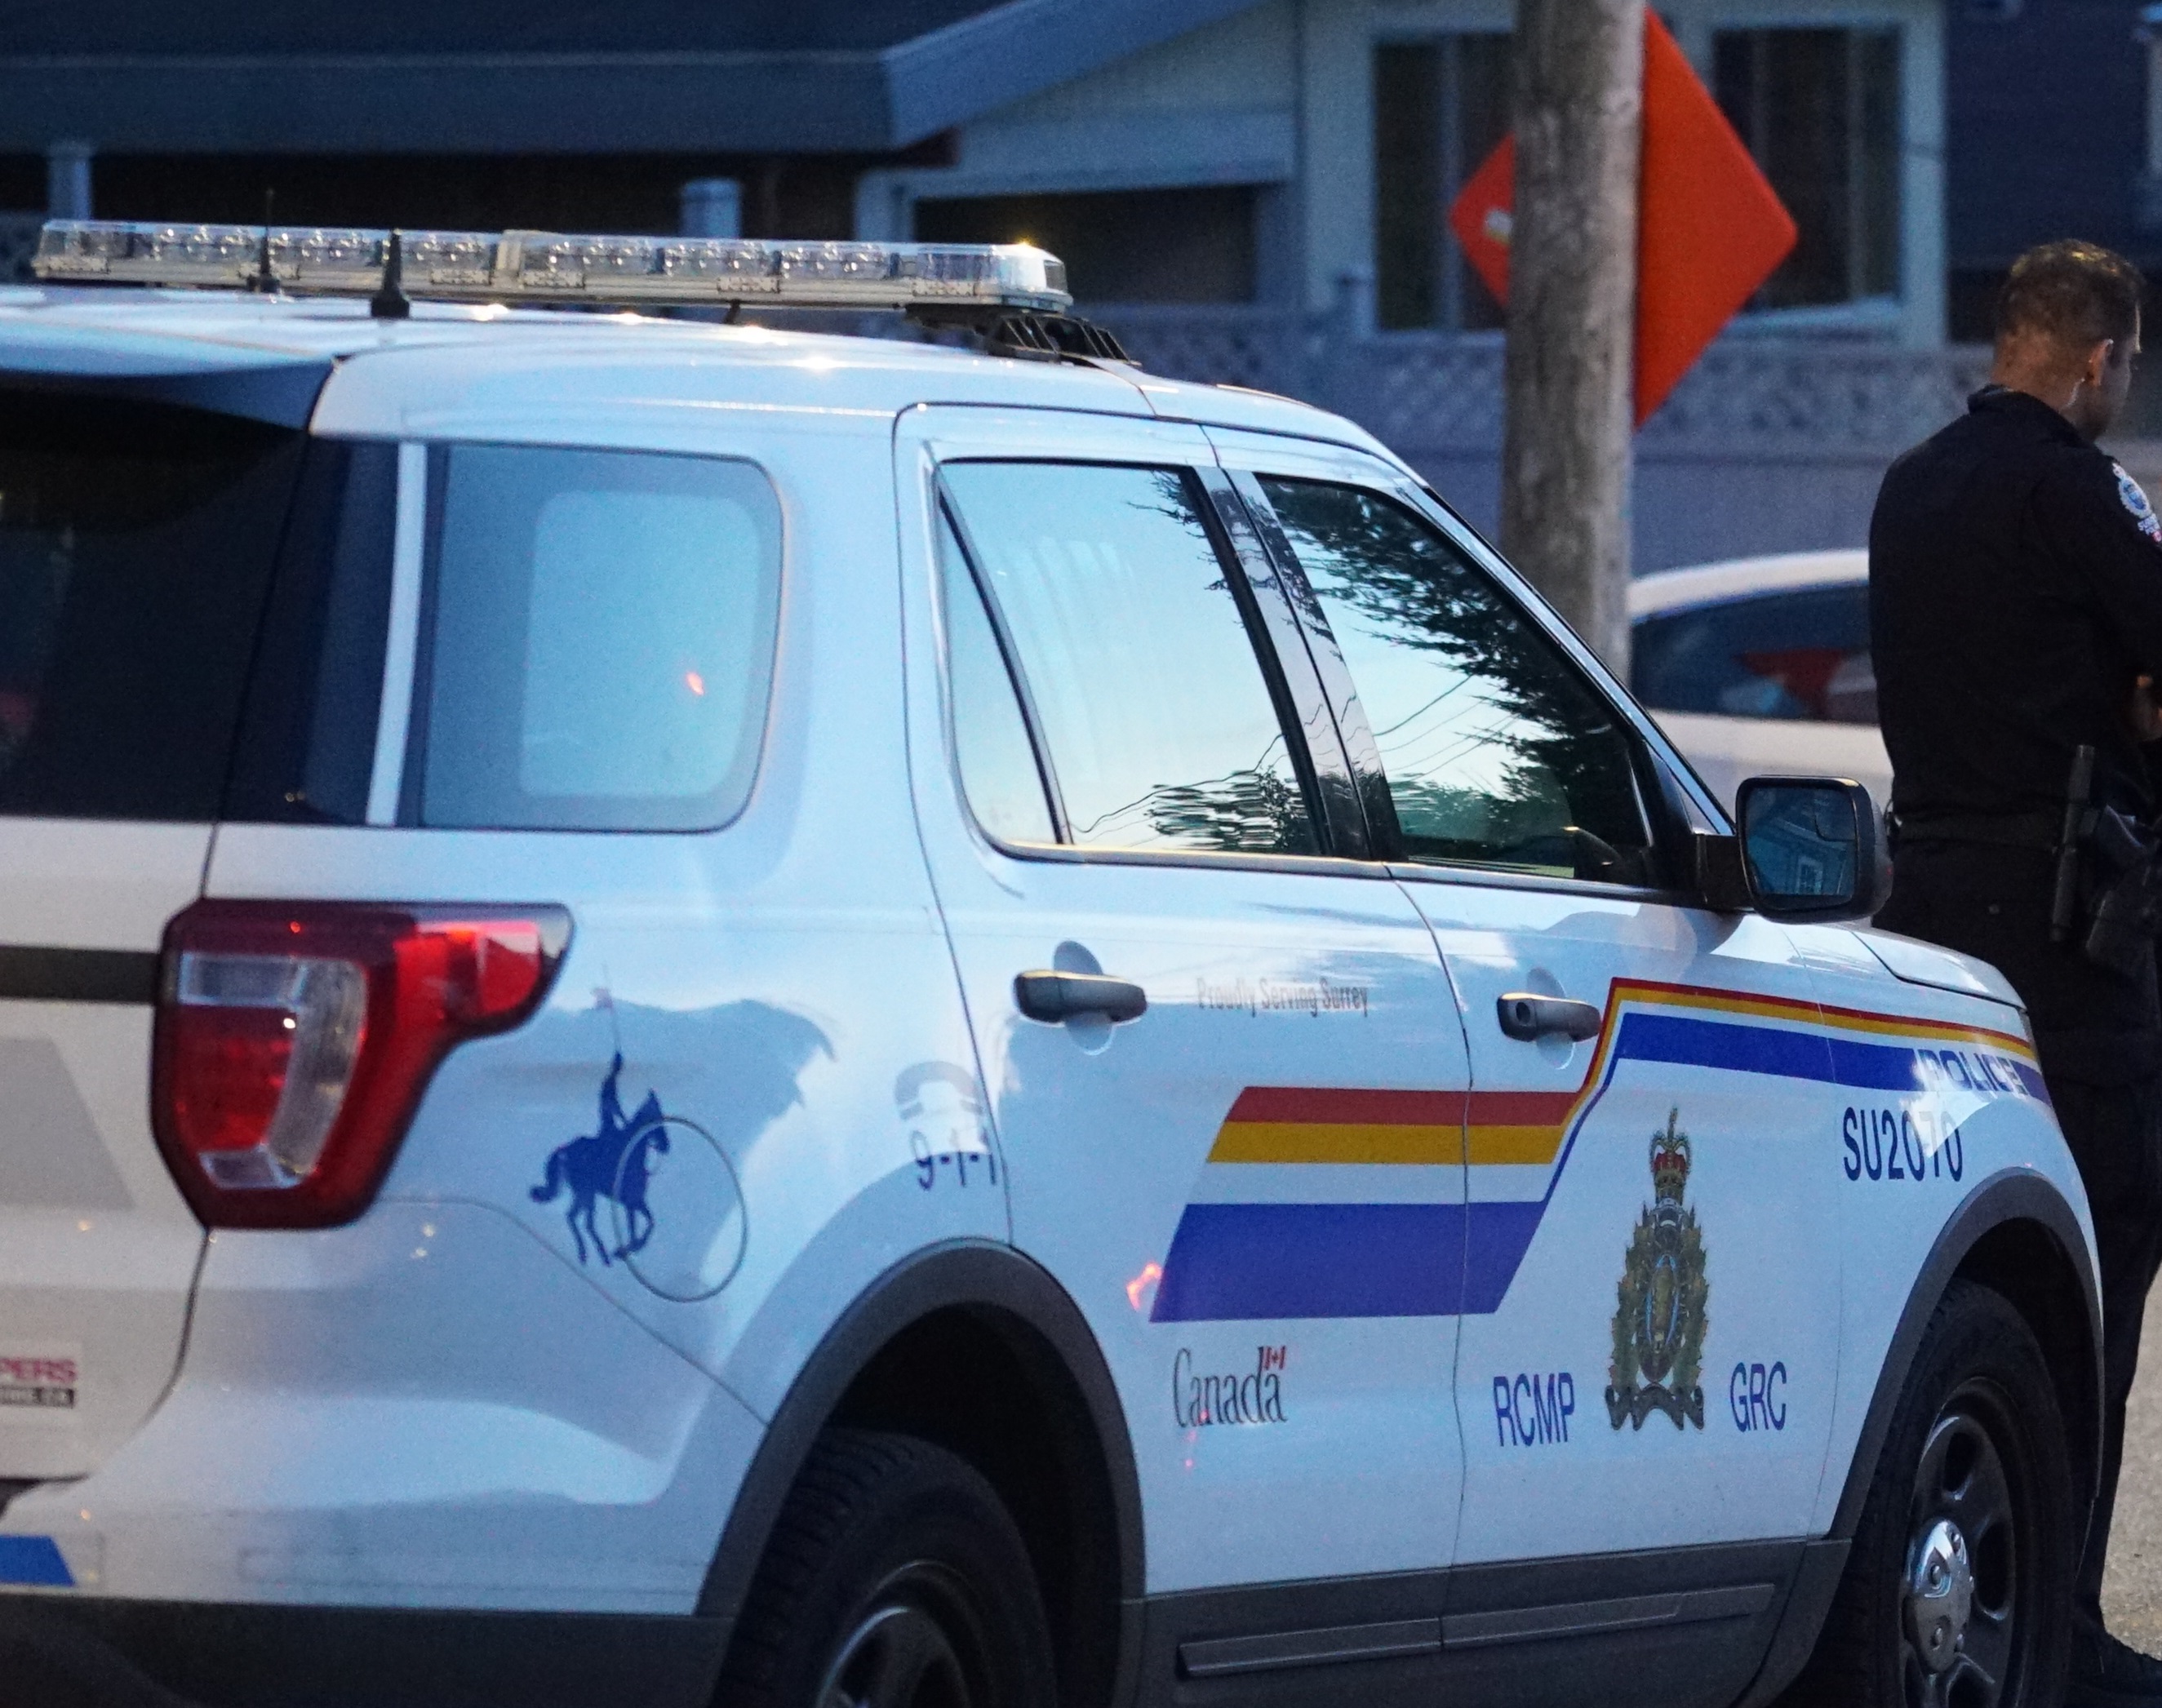 Woman among two suspects taken into custody for carjacking attempt, RCMP say